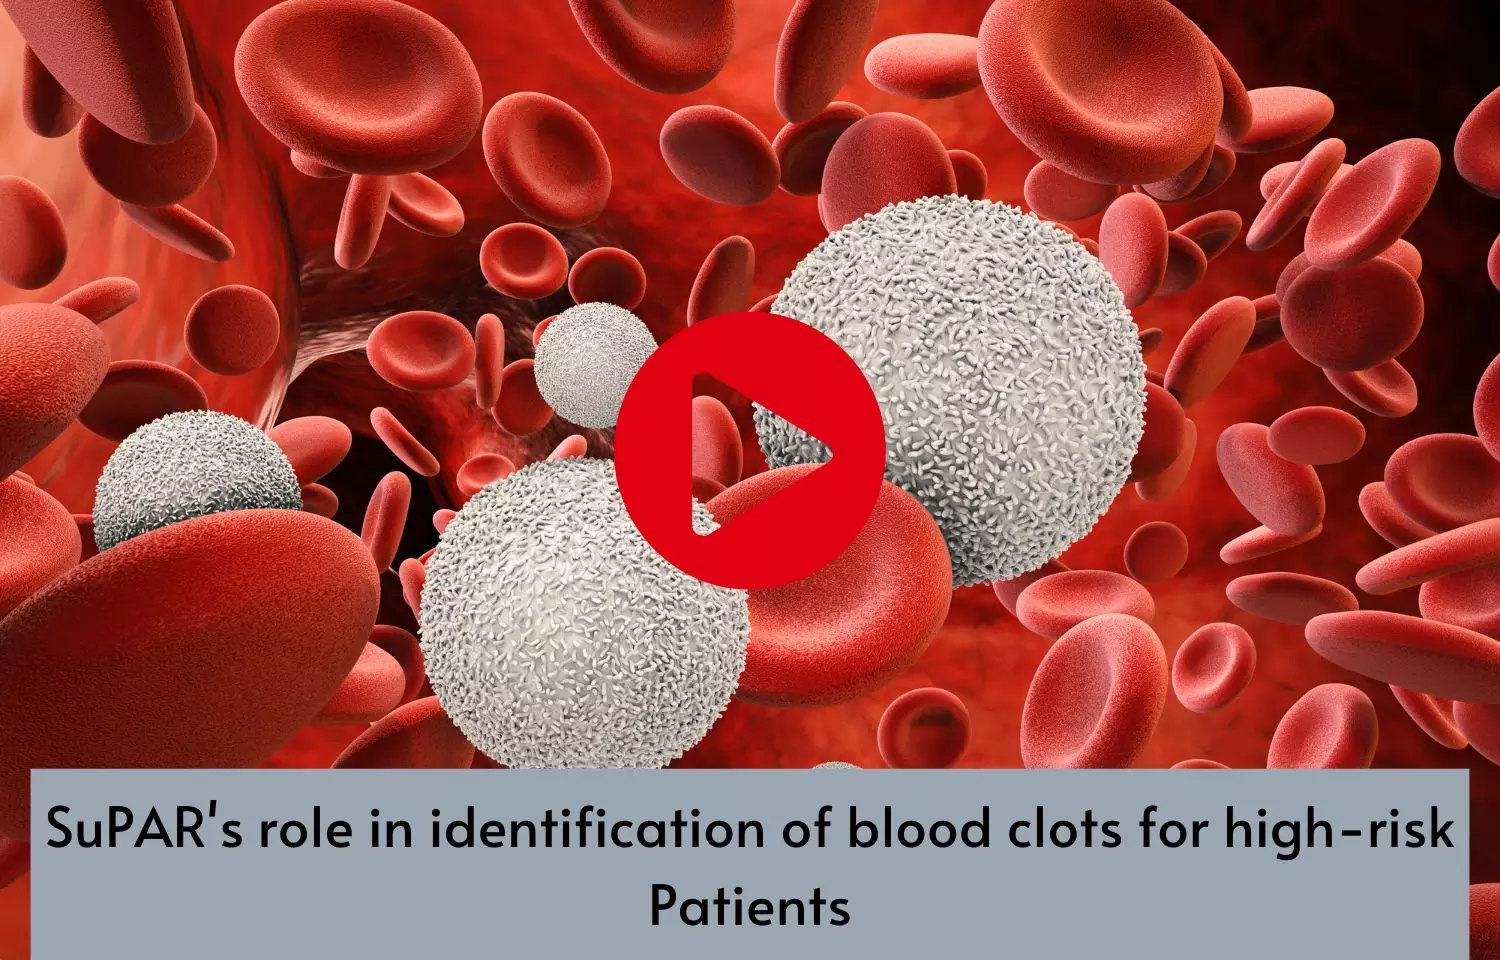 SuPARs role in identification of blood clots for high-risk Patients